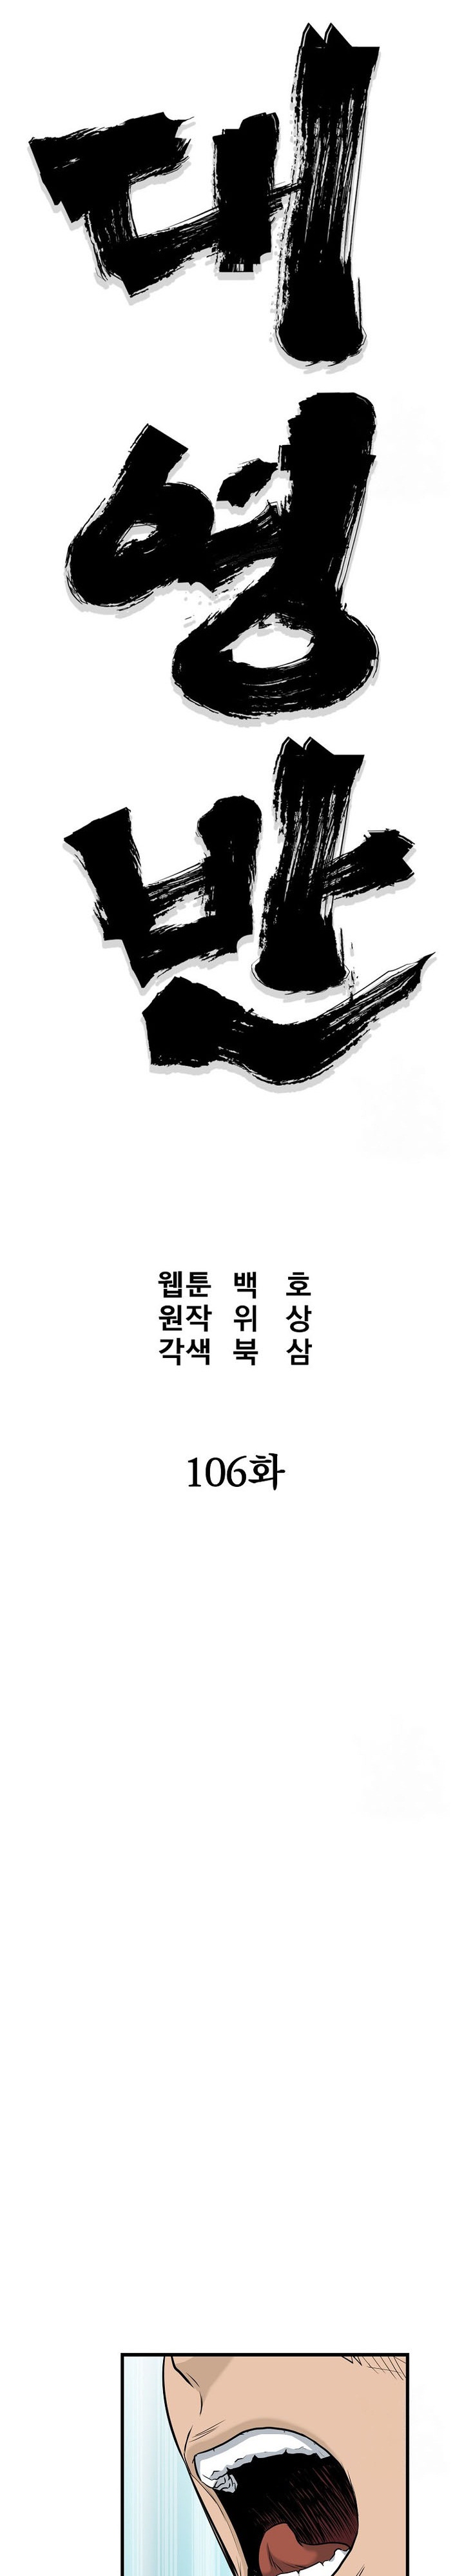 Grand General Chapter 106 - 171